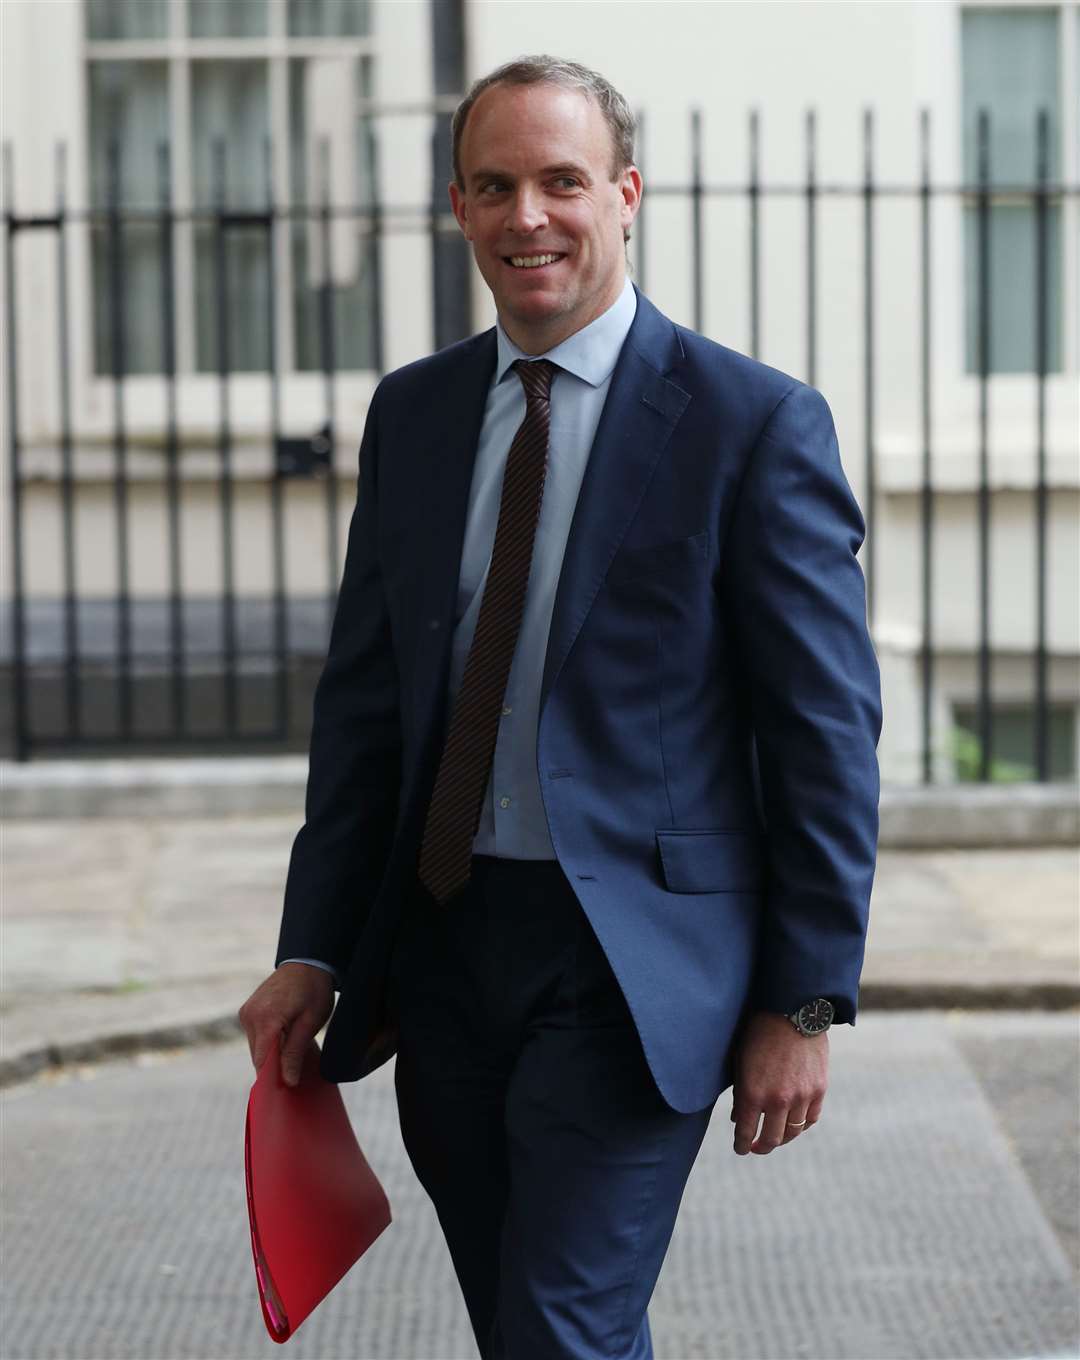 Foreign Secretary Dominic Raab attended a reception with the US Ambassador three days before Sacoolas left the UK (Yui Mok/PA)